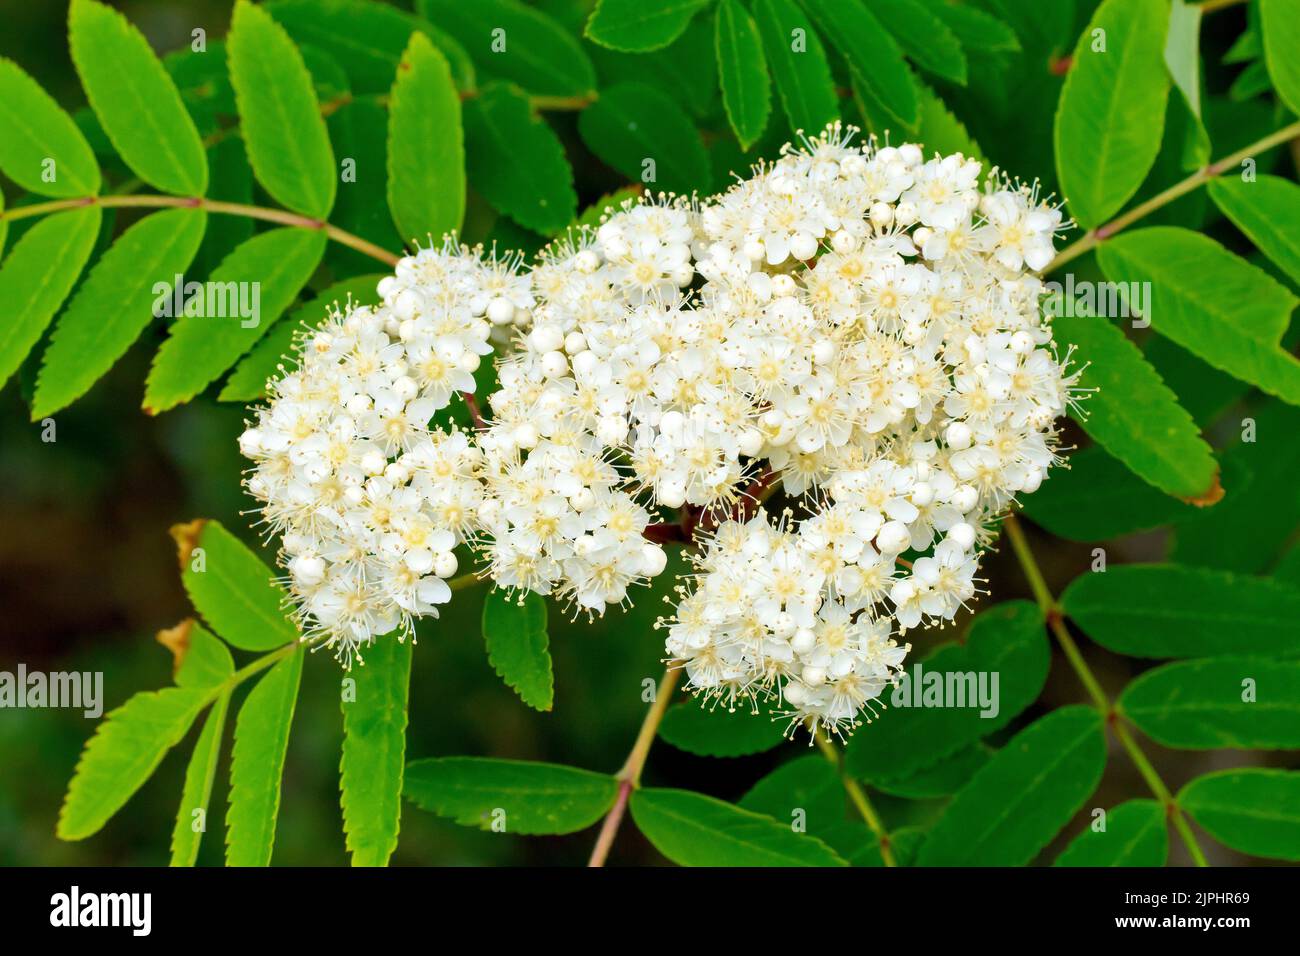 Rowan or Mountain Ash (sorbus aucuparia), close up of a solitary spray of white flowers and the distinctive leaves of the tree. Stock Photo